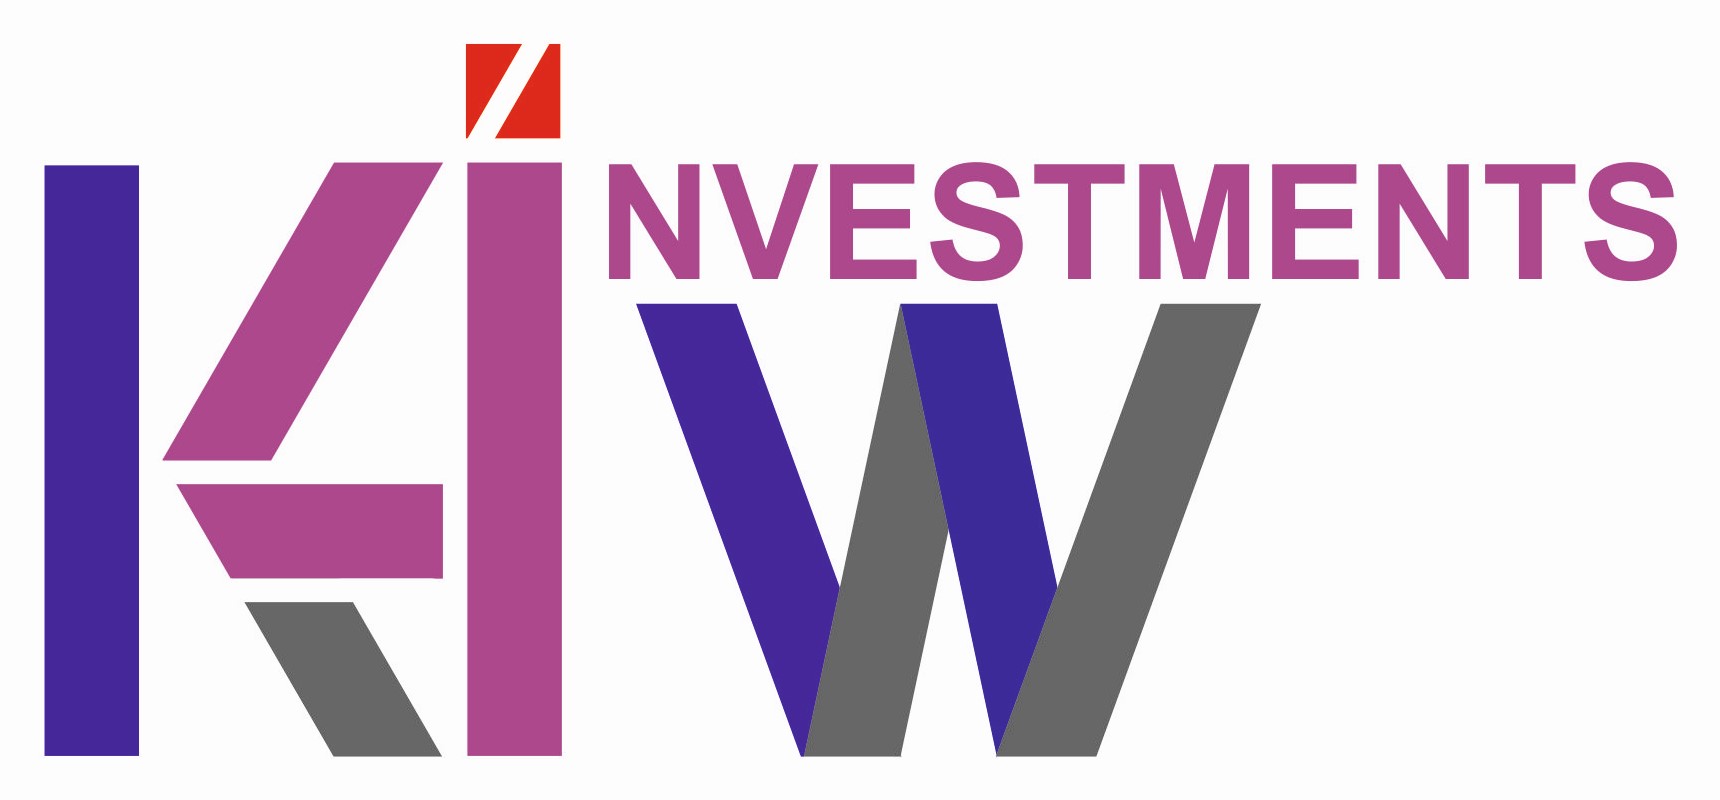 K4W Investments